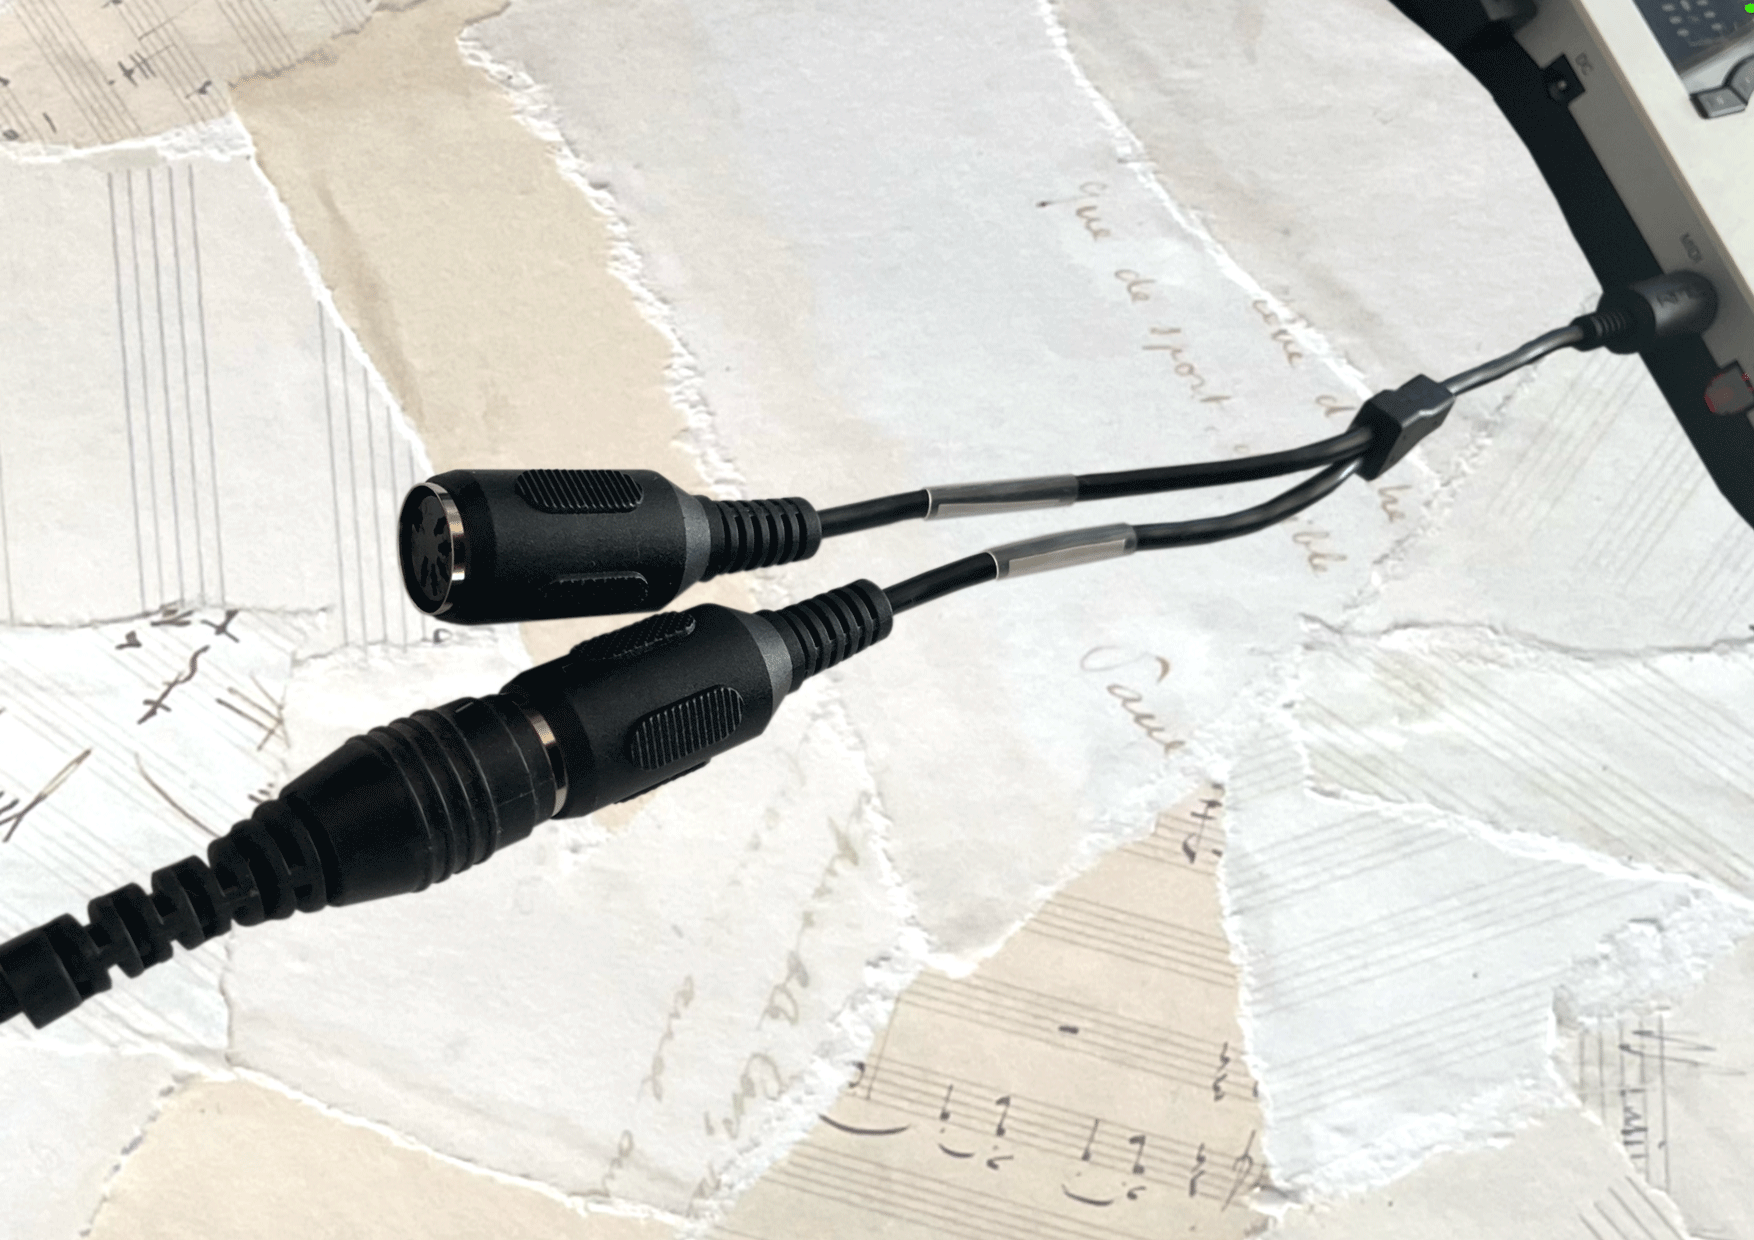 MIDI breakout cable for old-style 5 pin Midi connectors